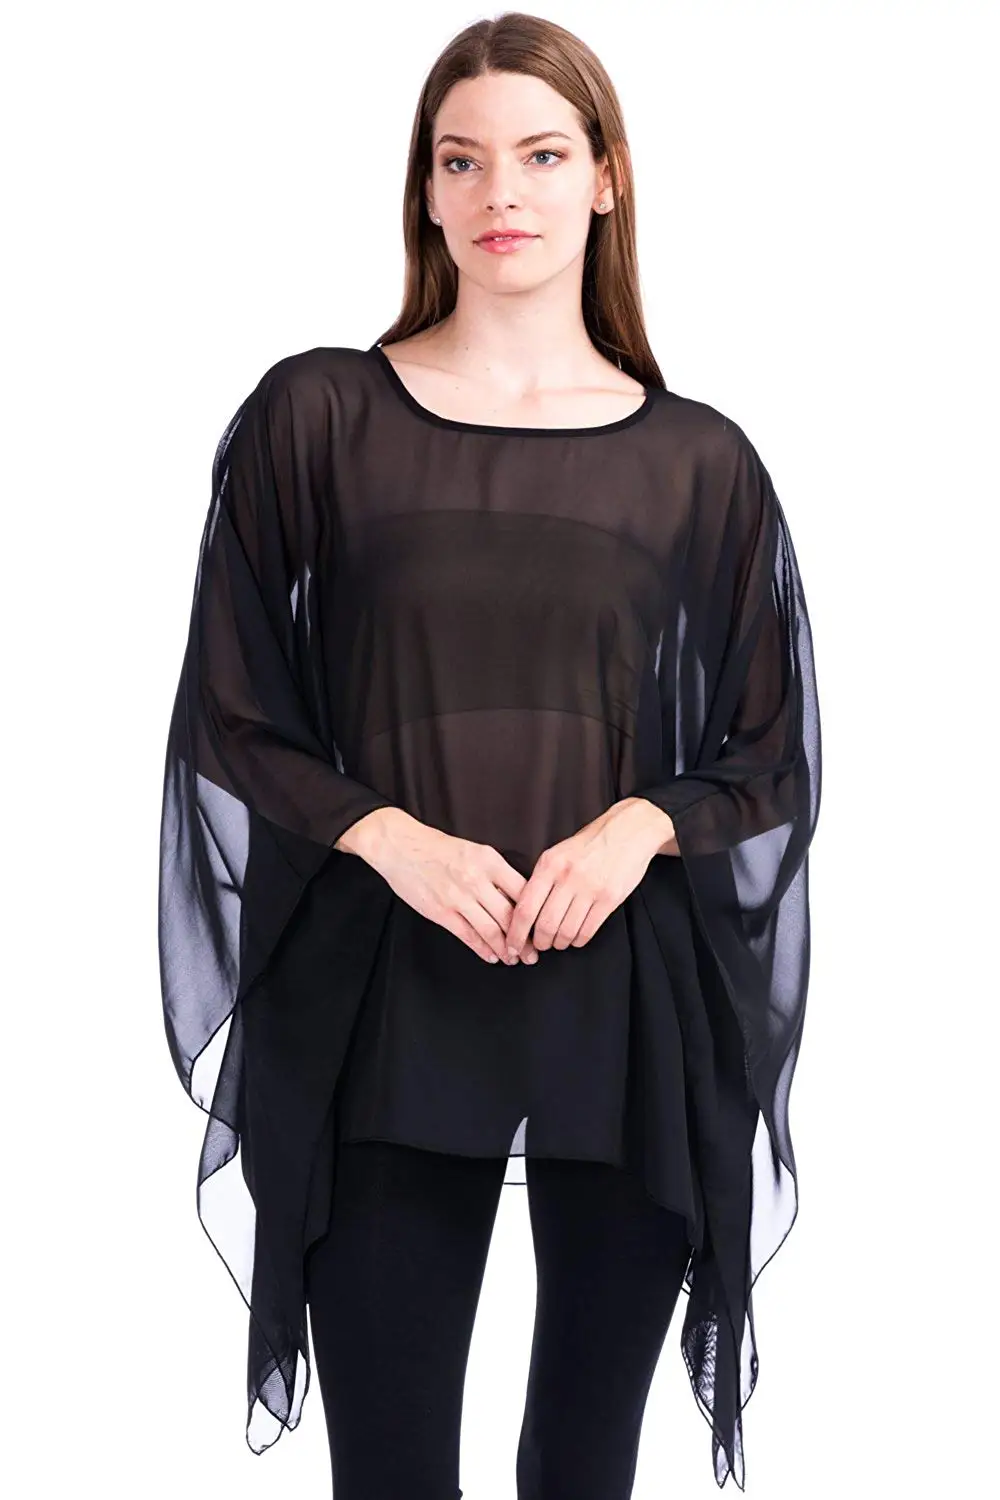 Cheap Sheer Poncho Top, find Sheer Poncho Top deals on line at Alibaba.com